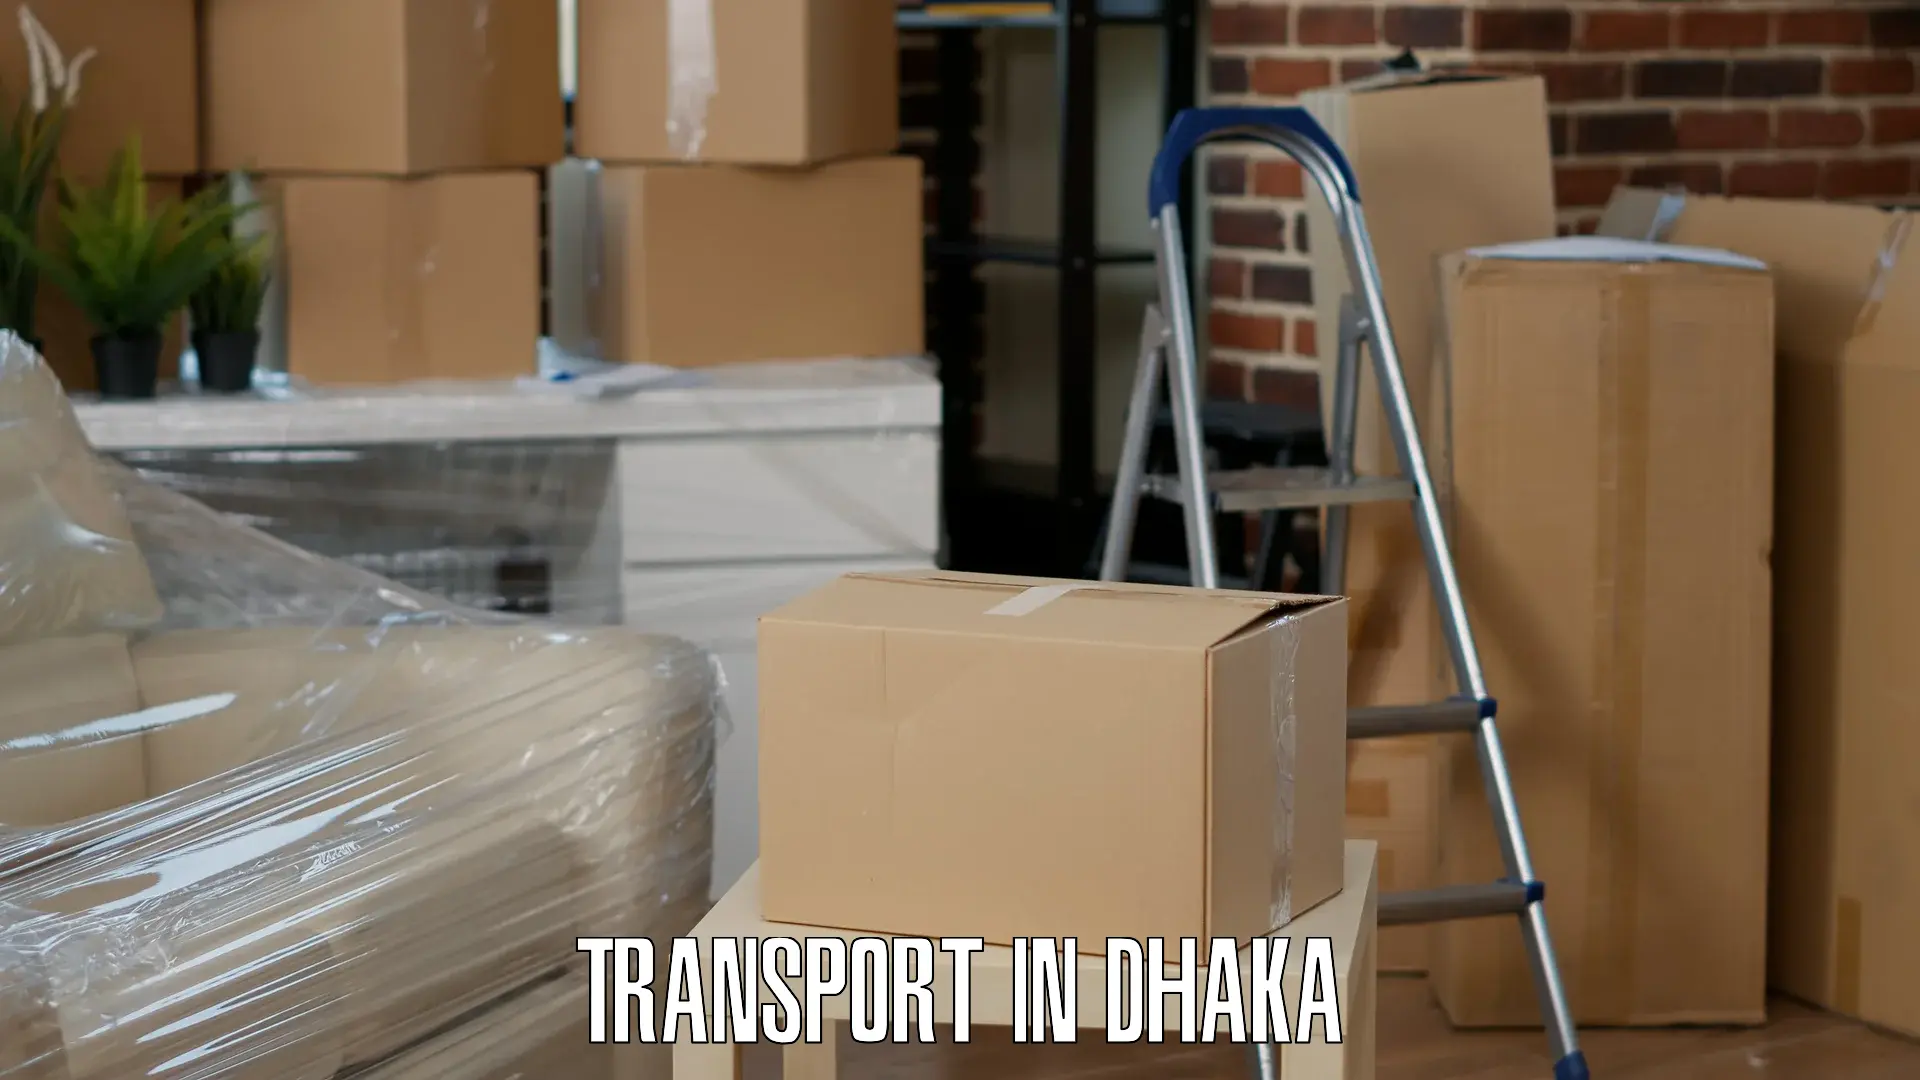 Road transport online services in Dhaka